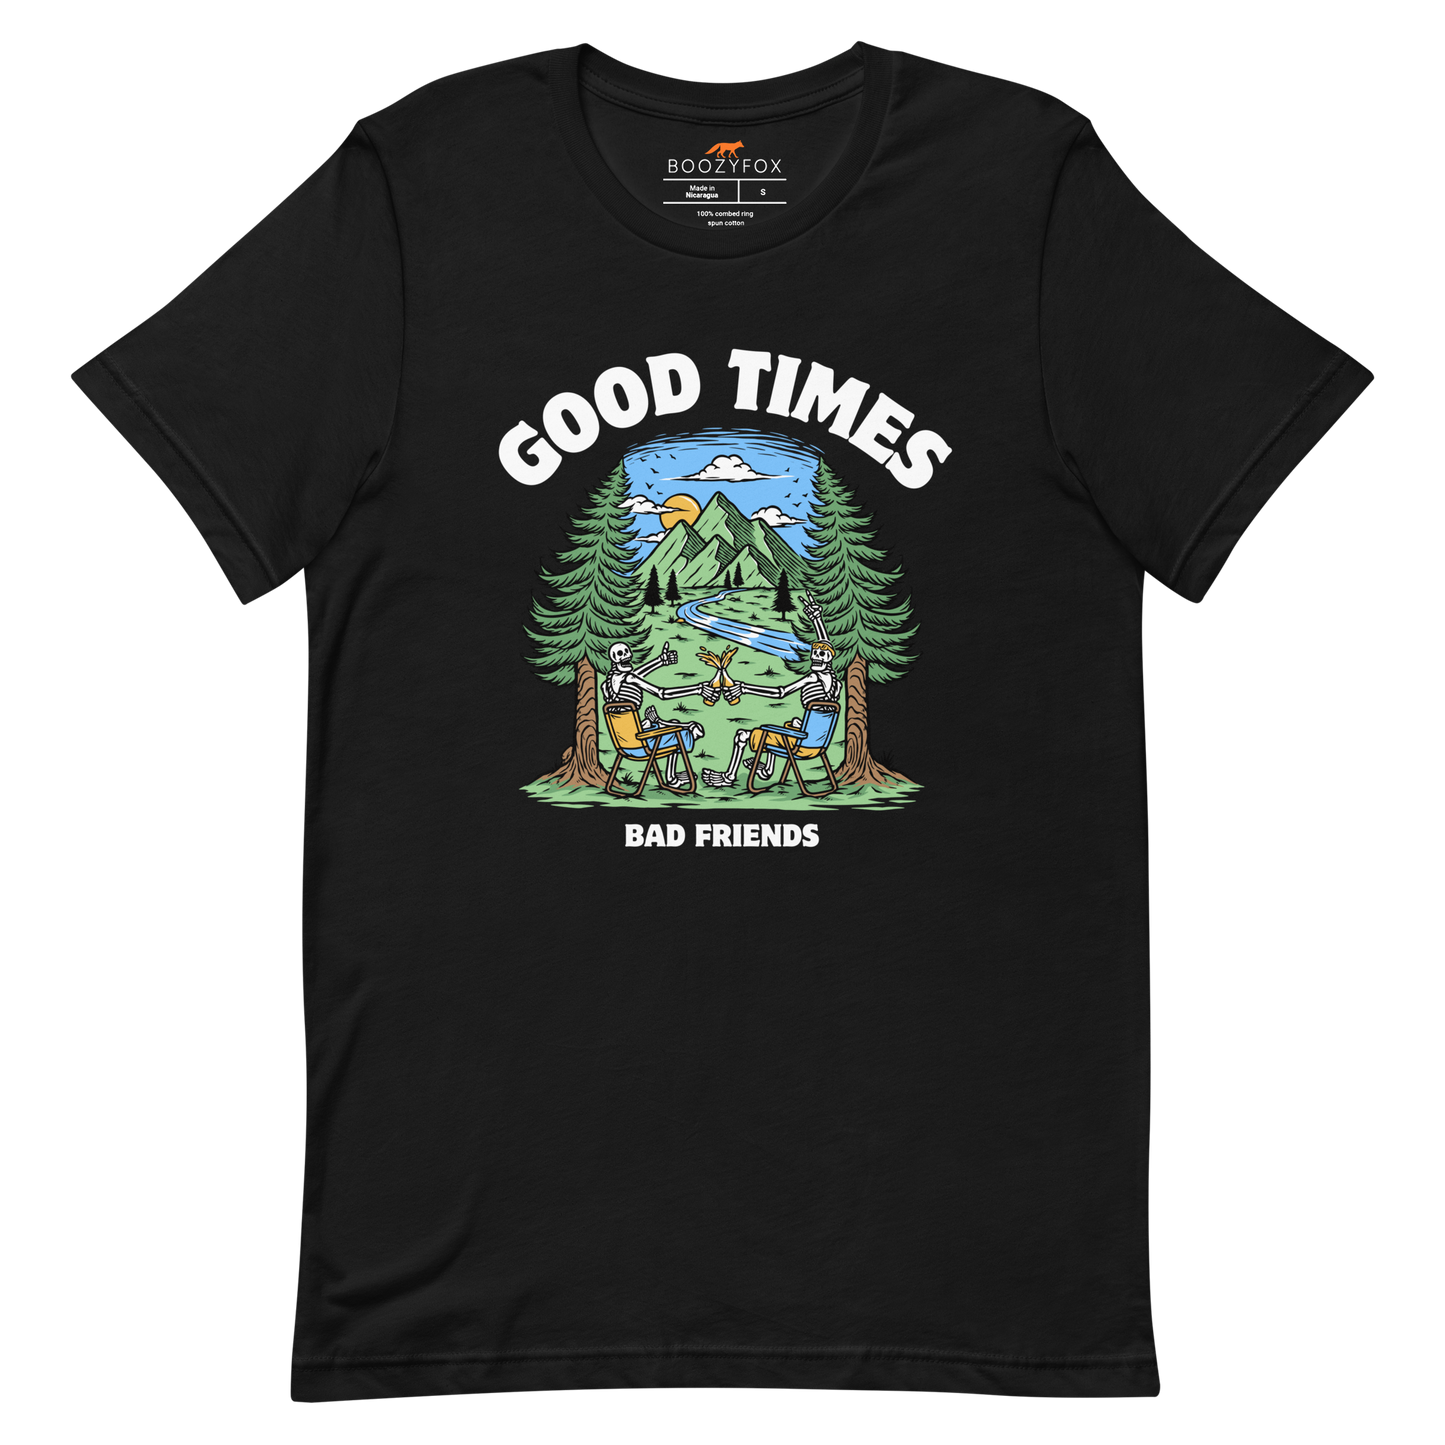 Black Premium Good Times Bad Friends Tee featuring a lively graphic of friends enjoying a beer in nature - Funny Graphic Nature Tees - Boozy Fox